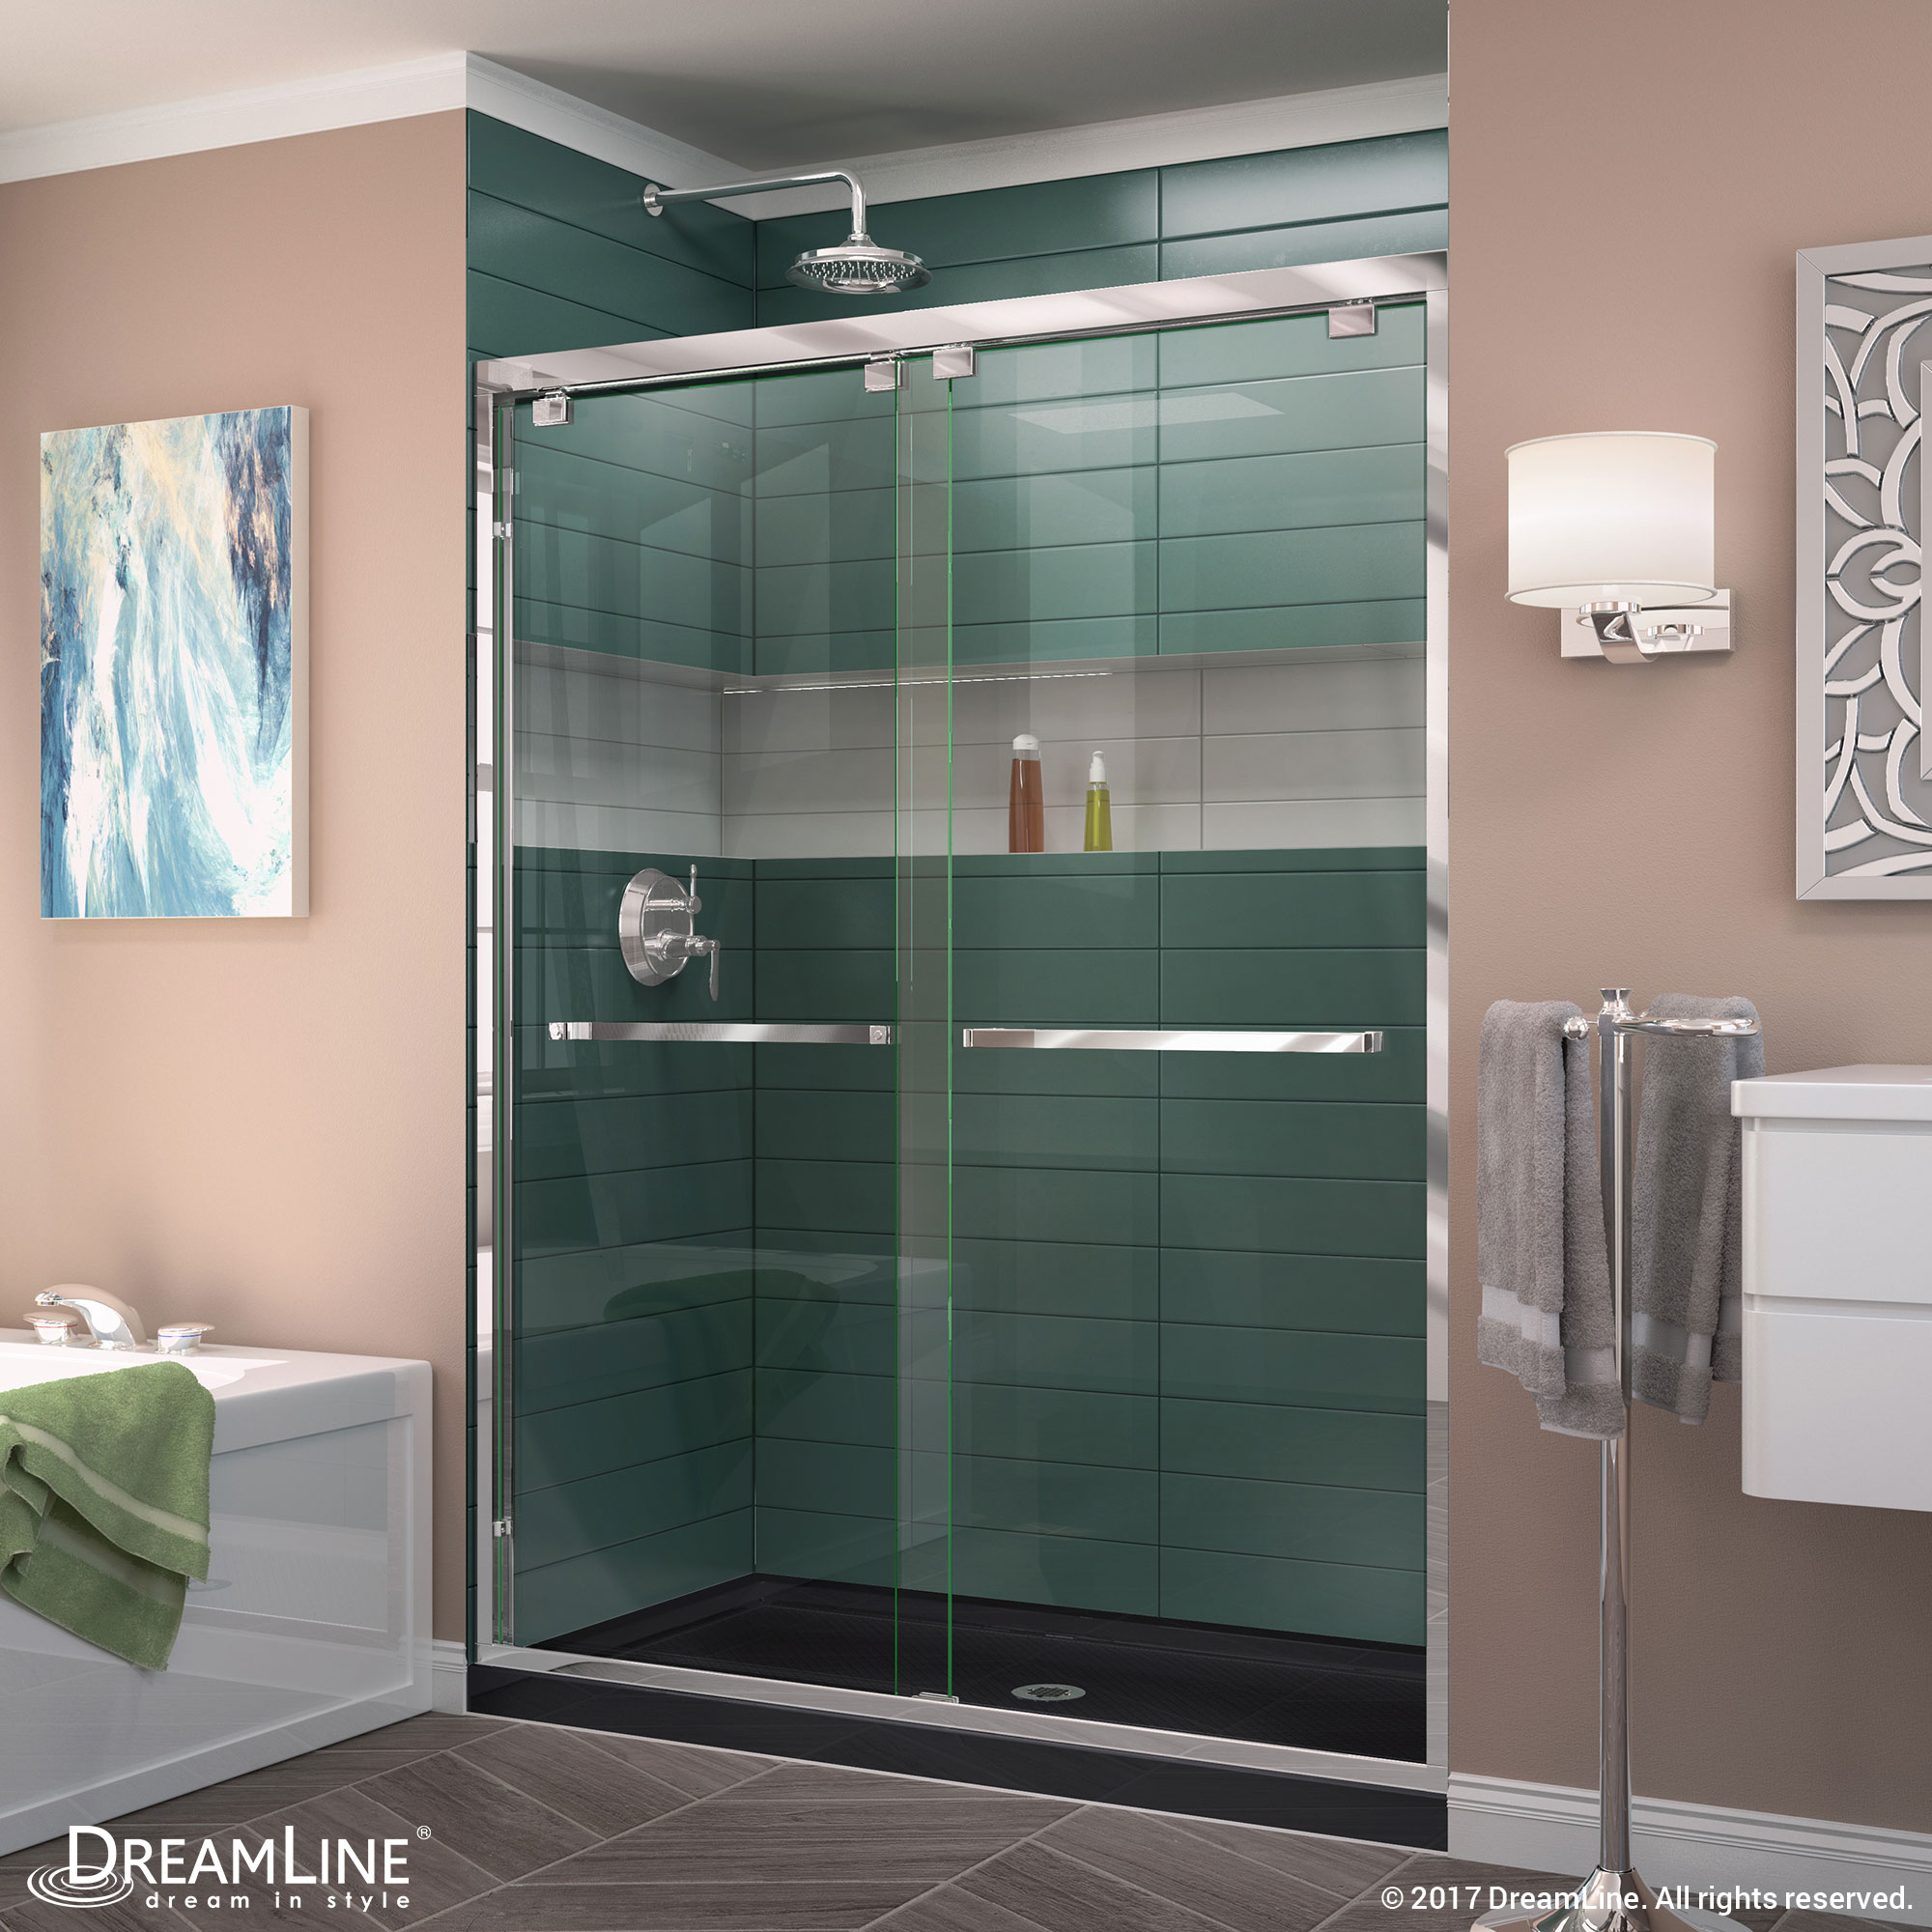 DreamLine Encore 30 in. D x 60 in. W x 78 3/4 in. H Bypass Shower Door in Brushed Nickel and Center Drain White Base Kit